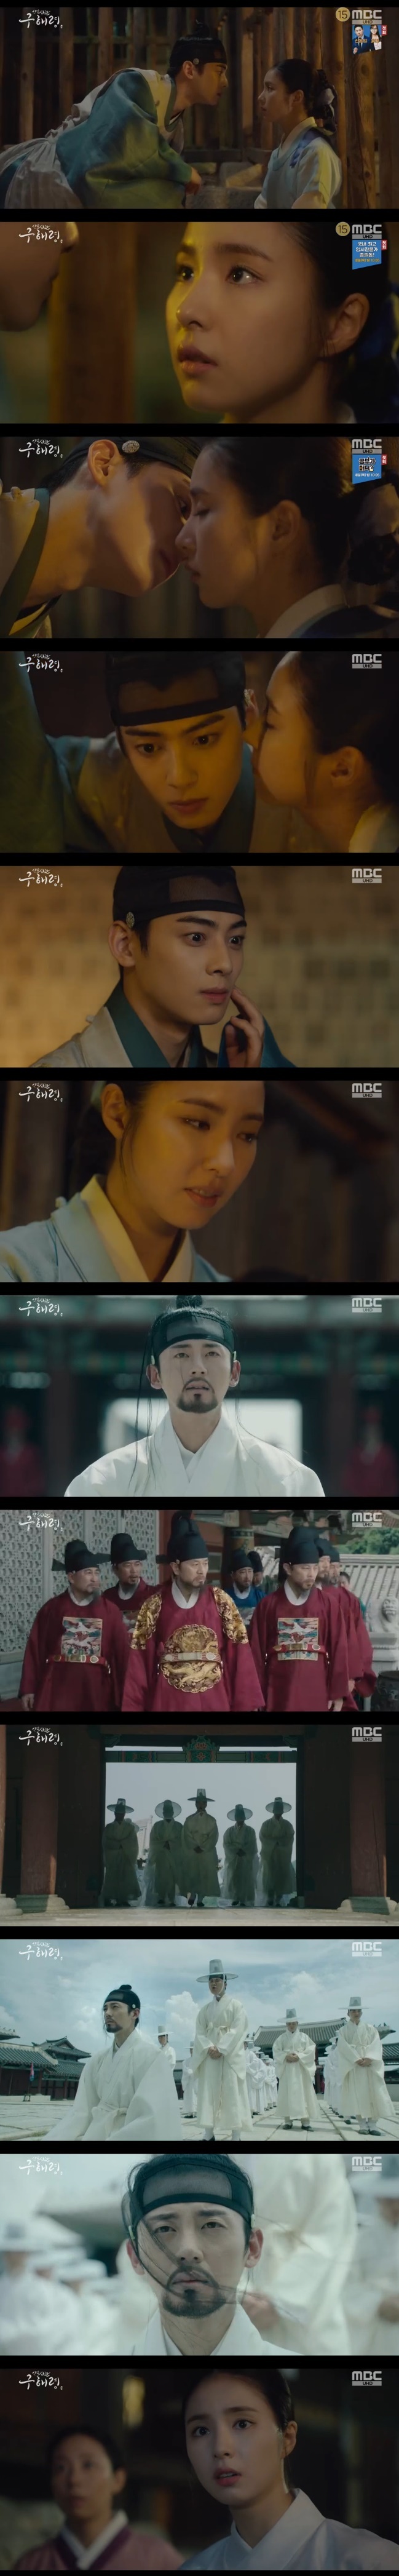 Seoul = = New cadet Rookie Historian Goo Hae-ryung Shin Se-kyung revealed his mind to Cha Eun-woo as ball-popo.In the MBC drama The New Entrepreneur Rookie Historian Goo Hae-ryung, which was broadcast on the afternoon of the 21st, Ada Lovelace Rookie Historian Goo Hae-ryung (Shin Se-kyung) gave a surprise kiss to the Sejo of Joseon Yirim (Cha Eun-woo) I did.Min Woo-won (Lee Ji-hoon) visited the king Lee Tae (Kim Min-sang) and made a deep impression by appealing.Rookie Historian Goo Hae-ryung was discovered listening to Lee Tae and the conversation between Min Ik-pyeong (Choi Duk-moon).Rookie Historian Goo Hae-ryung tried to enter the contrast but was rejected, and secretly tried to record it in the book.Lee Tae came out of the match with a surprise. He faced Rookie Historian Goo Hae-ryung and shouted, What did you write?But Rookie Historian Goo Hae-ryung replied: Its a private matter, I cant tell you.Rookie Historian Goo Hae-ryung, who did not accept the name, was taken to the bank and trapped in Oksa.When Irim heard this news, he was surprised and headed to Oksa. When he met Rookie Historian Goo Hae-ryung, he was worried that he was okay, no harm.Irim also brings a lunch box filled with love.Rookie Historian Goo Hae-ryung laughed broadly, saying, Sejo of Joseon, who gives GLOW a jade bar, is a Sejo of Joseon.You are the one who made Sejo of Joseon, Irim said. Do not worry too much, nothing will happen.Then the faces of the two men came close. Suddenly the atmosphere became strange, and Irim slowly approached Rookie Historian Goo Hae-ryung.I tried to kiss him, but at this time, Heo Sam-bo (the Holy Land) appeared.Leerim turned away, regretting, and Rookie Historian Goo Hae-ryung, who watched him, called him up and gave him a surprise kiss on the ball.Irim got out of Oksa blankly and smiled happily.Min Woo-won put his life on the charge, as Lee Tae ordered him to bring a corrective device, saying he would fix the habits of the cadets.Minwoo won the king and said, Your Grace, please take the meaning of inspecting the municipal government. If you do not collect it, please hit me with Dok2.Your Majesty has no authority to inspect the municipal government, he said.Lee Tae was angry, saying, You are to me, the king of this country! When I tried to catch Dok2, I would show you what authority I have, Sungkyunkwan larvae appeared.Showing the song-singing protest, the Hogok Gwondang, which eventually took a step back; when the king took his name, Rookie Historian Goo Hae-ryung was also released from Oksa.At the end of the broadcast, someone came to Rookie Historian Goo Hae-ryungs house, knocking on the gate saying, Its the name of the main charge.It is noteworthy that the crisis will come again to Rookie Historian Goo Hae-ryung.Meanwhile, New Entrepreneur Rookie Historian Goo Hae-ryung is a drama depicting the first problematic Ada Lovelace () Rookie Historian Goo Hae-ryung of Joseon and the Phil full romance annals of Prince Irim, the anti-war mother solo, broadcast every Wednesday and Thursday at 8:55 pm.